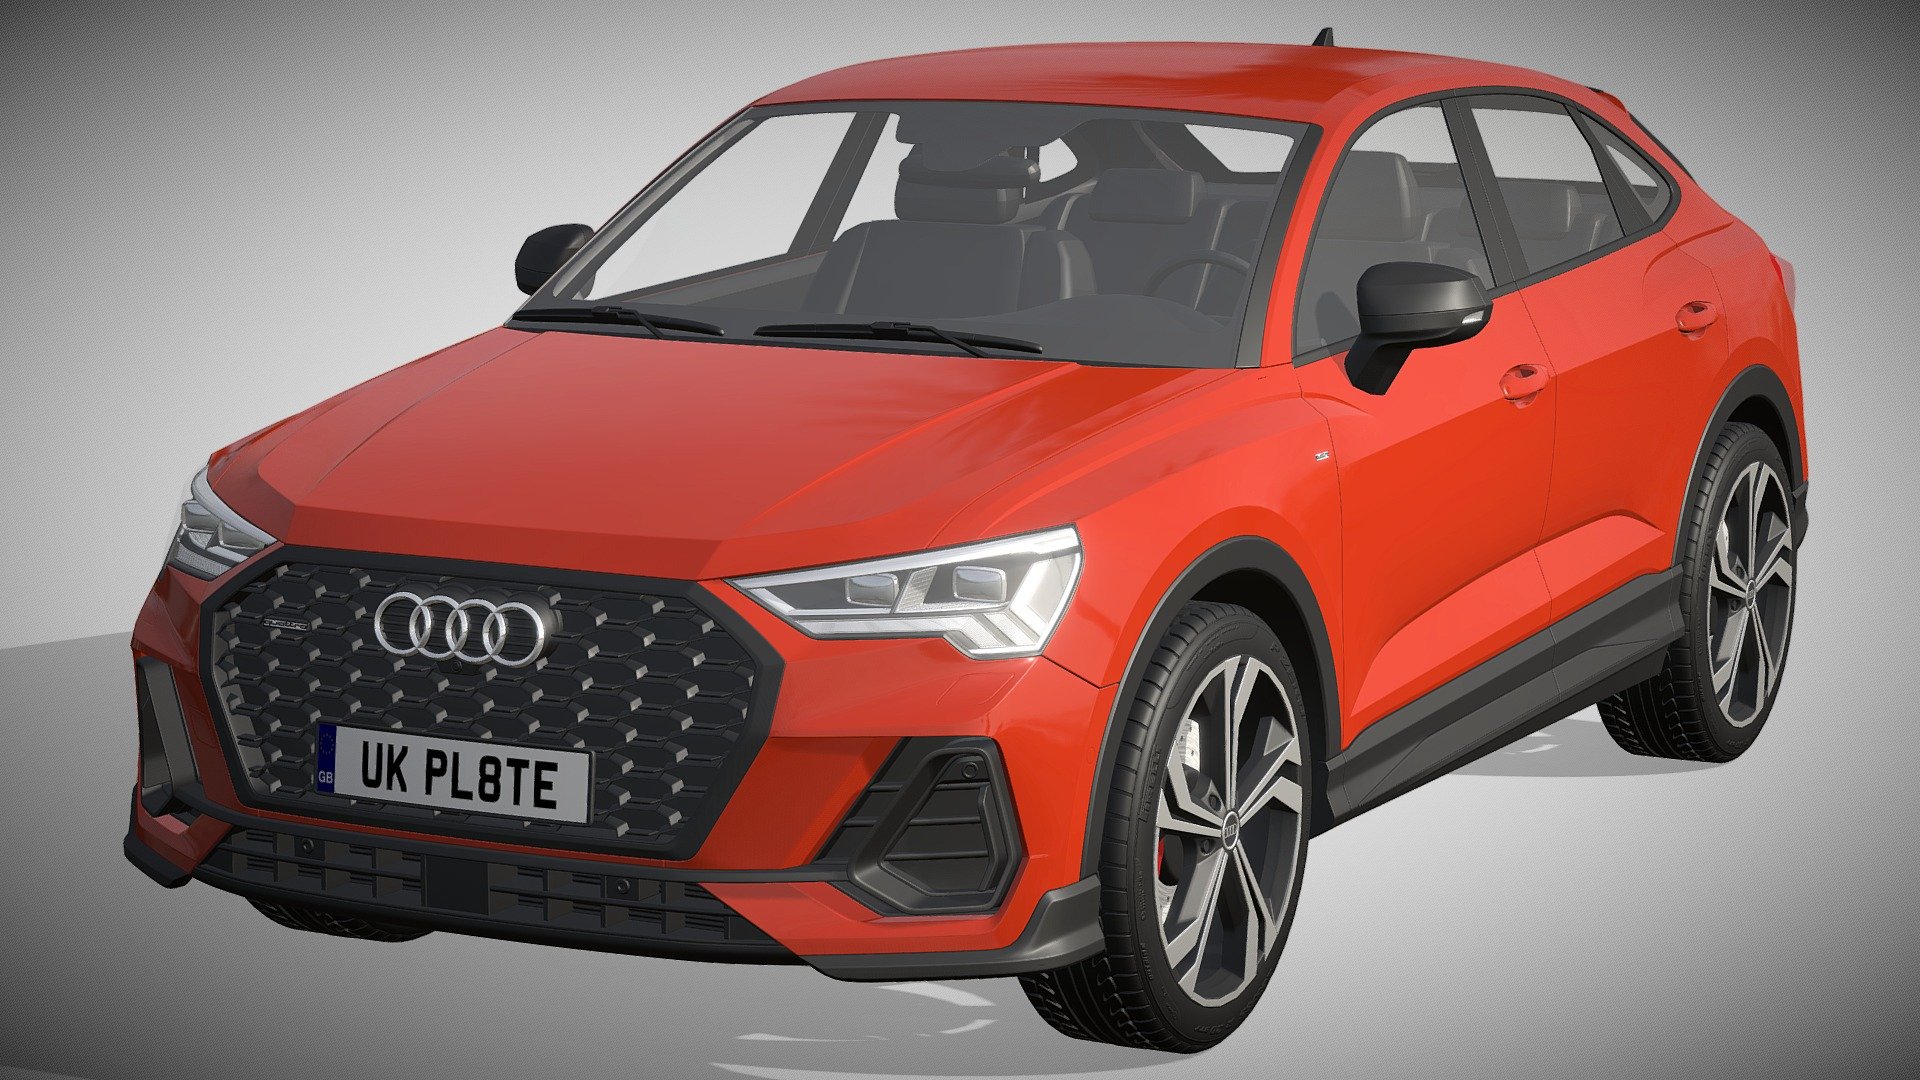 AUDI Q3 SPORTBACK 2020

https://www.audi.ru/ru/web/ru/models/q3/q3-sportback.html

Clean geometry Light weight model, yet completely detailed for HI-Res renders. Use for movies, Advertisements or games

Corona render and materials

All textures include in *.rar files

Lighting setup is not included in the file! - AUDI Q3 SPORTBACK 2020 - Buy Royalty Free 3D model by zifir3d 3d model